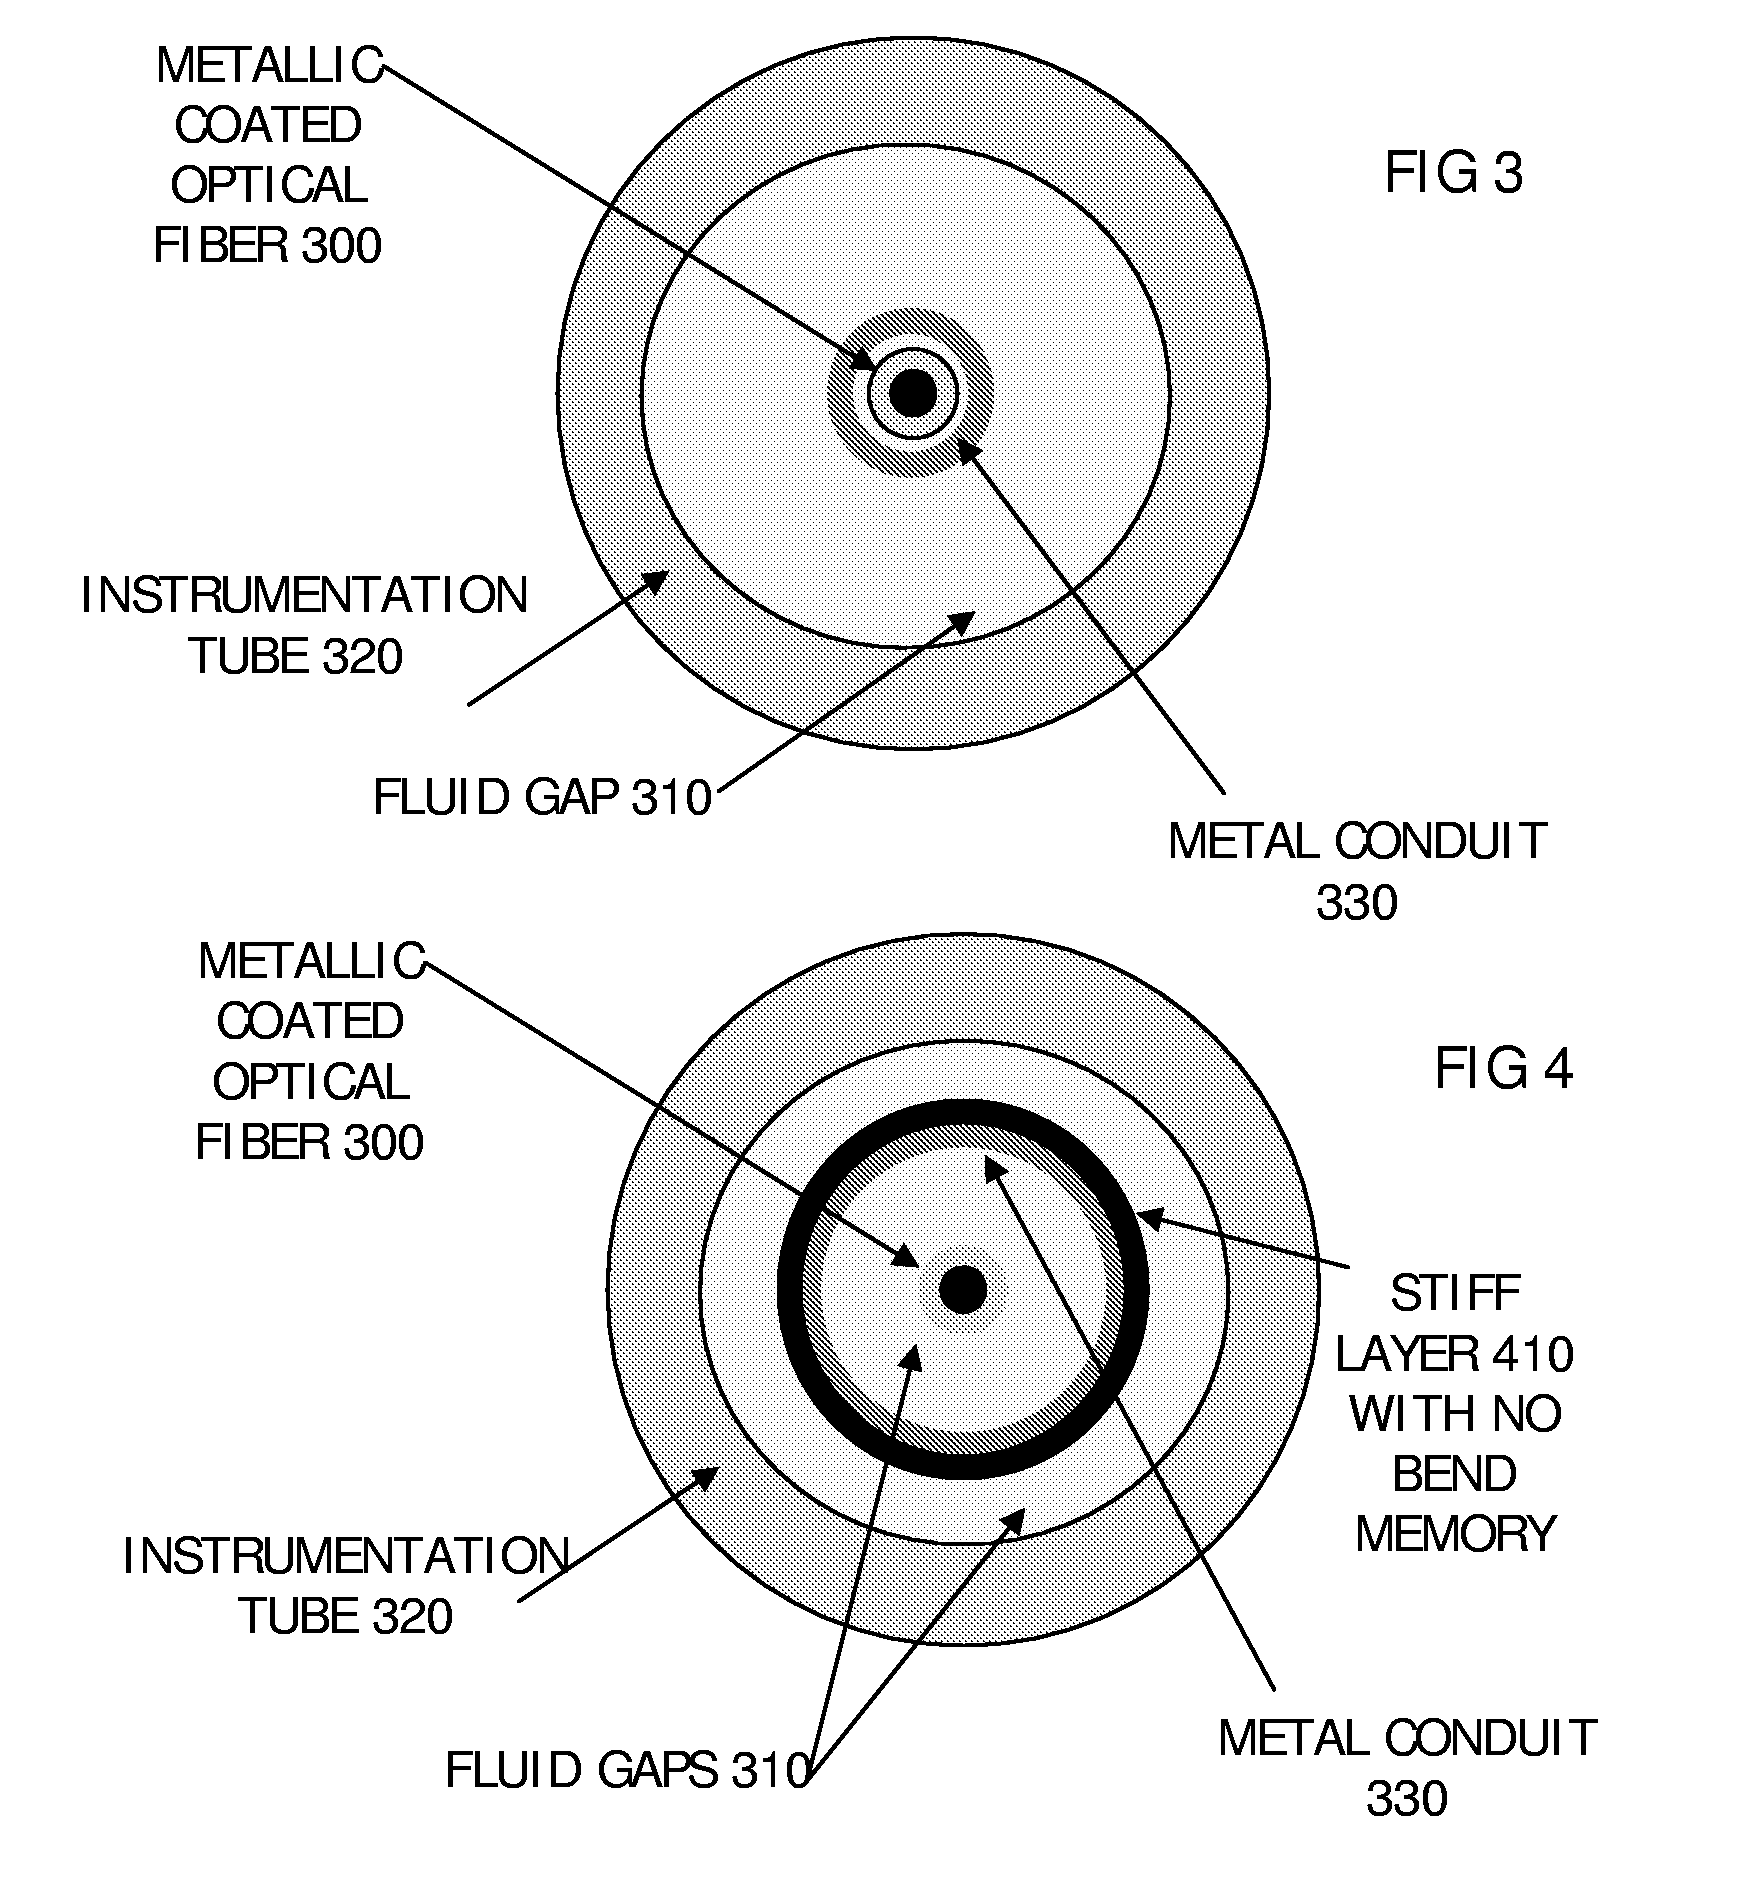 Sensing System Using Optical Fiber Suited to High Temperatures